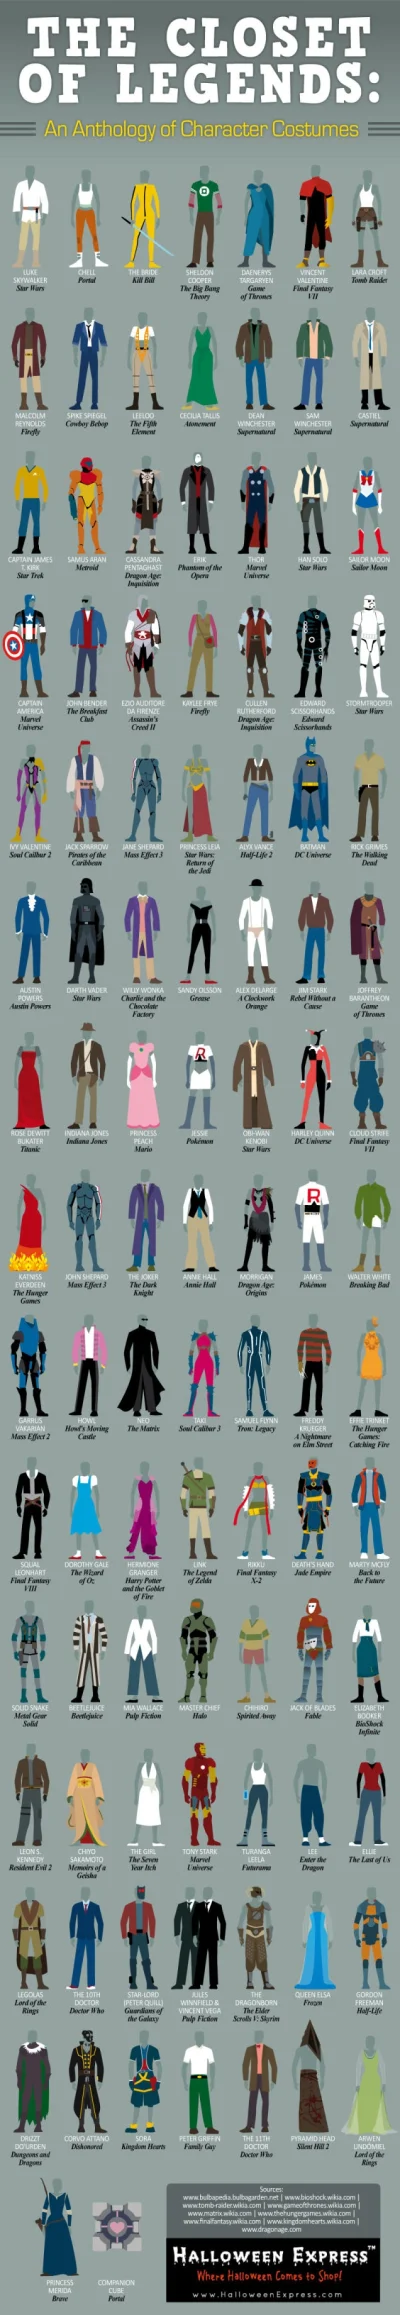 mach-mach - 100 iconic costumes of popular characters from pop culture
#popkultura 
...